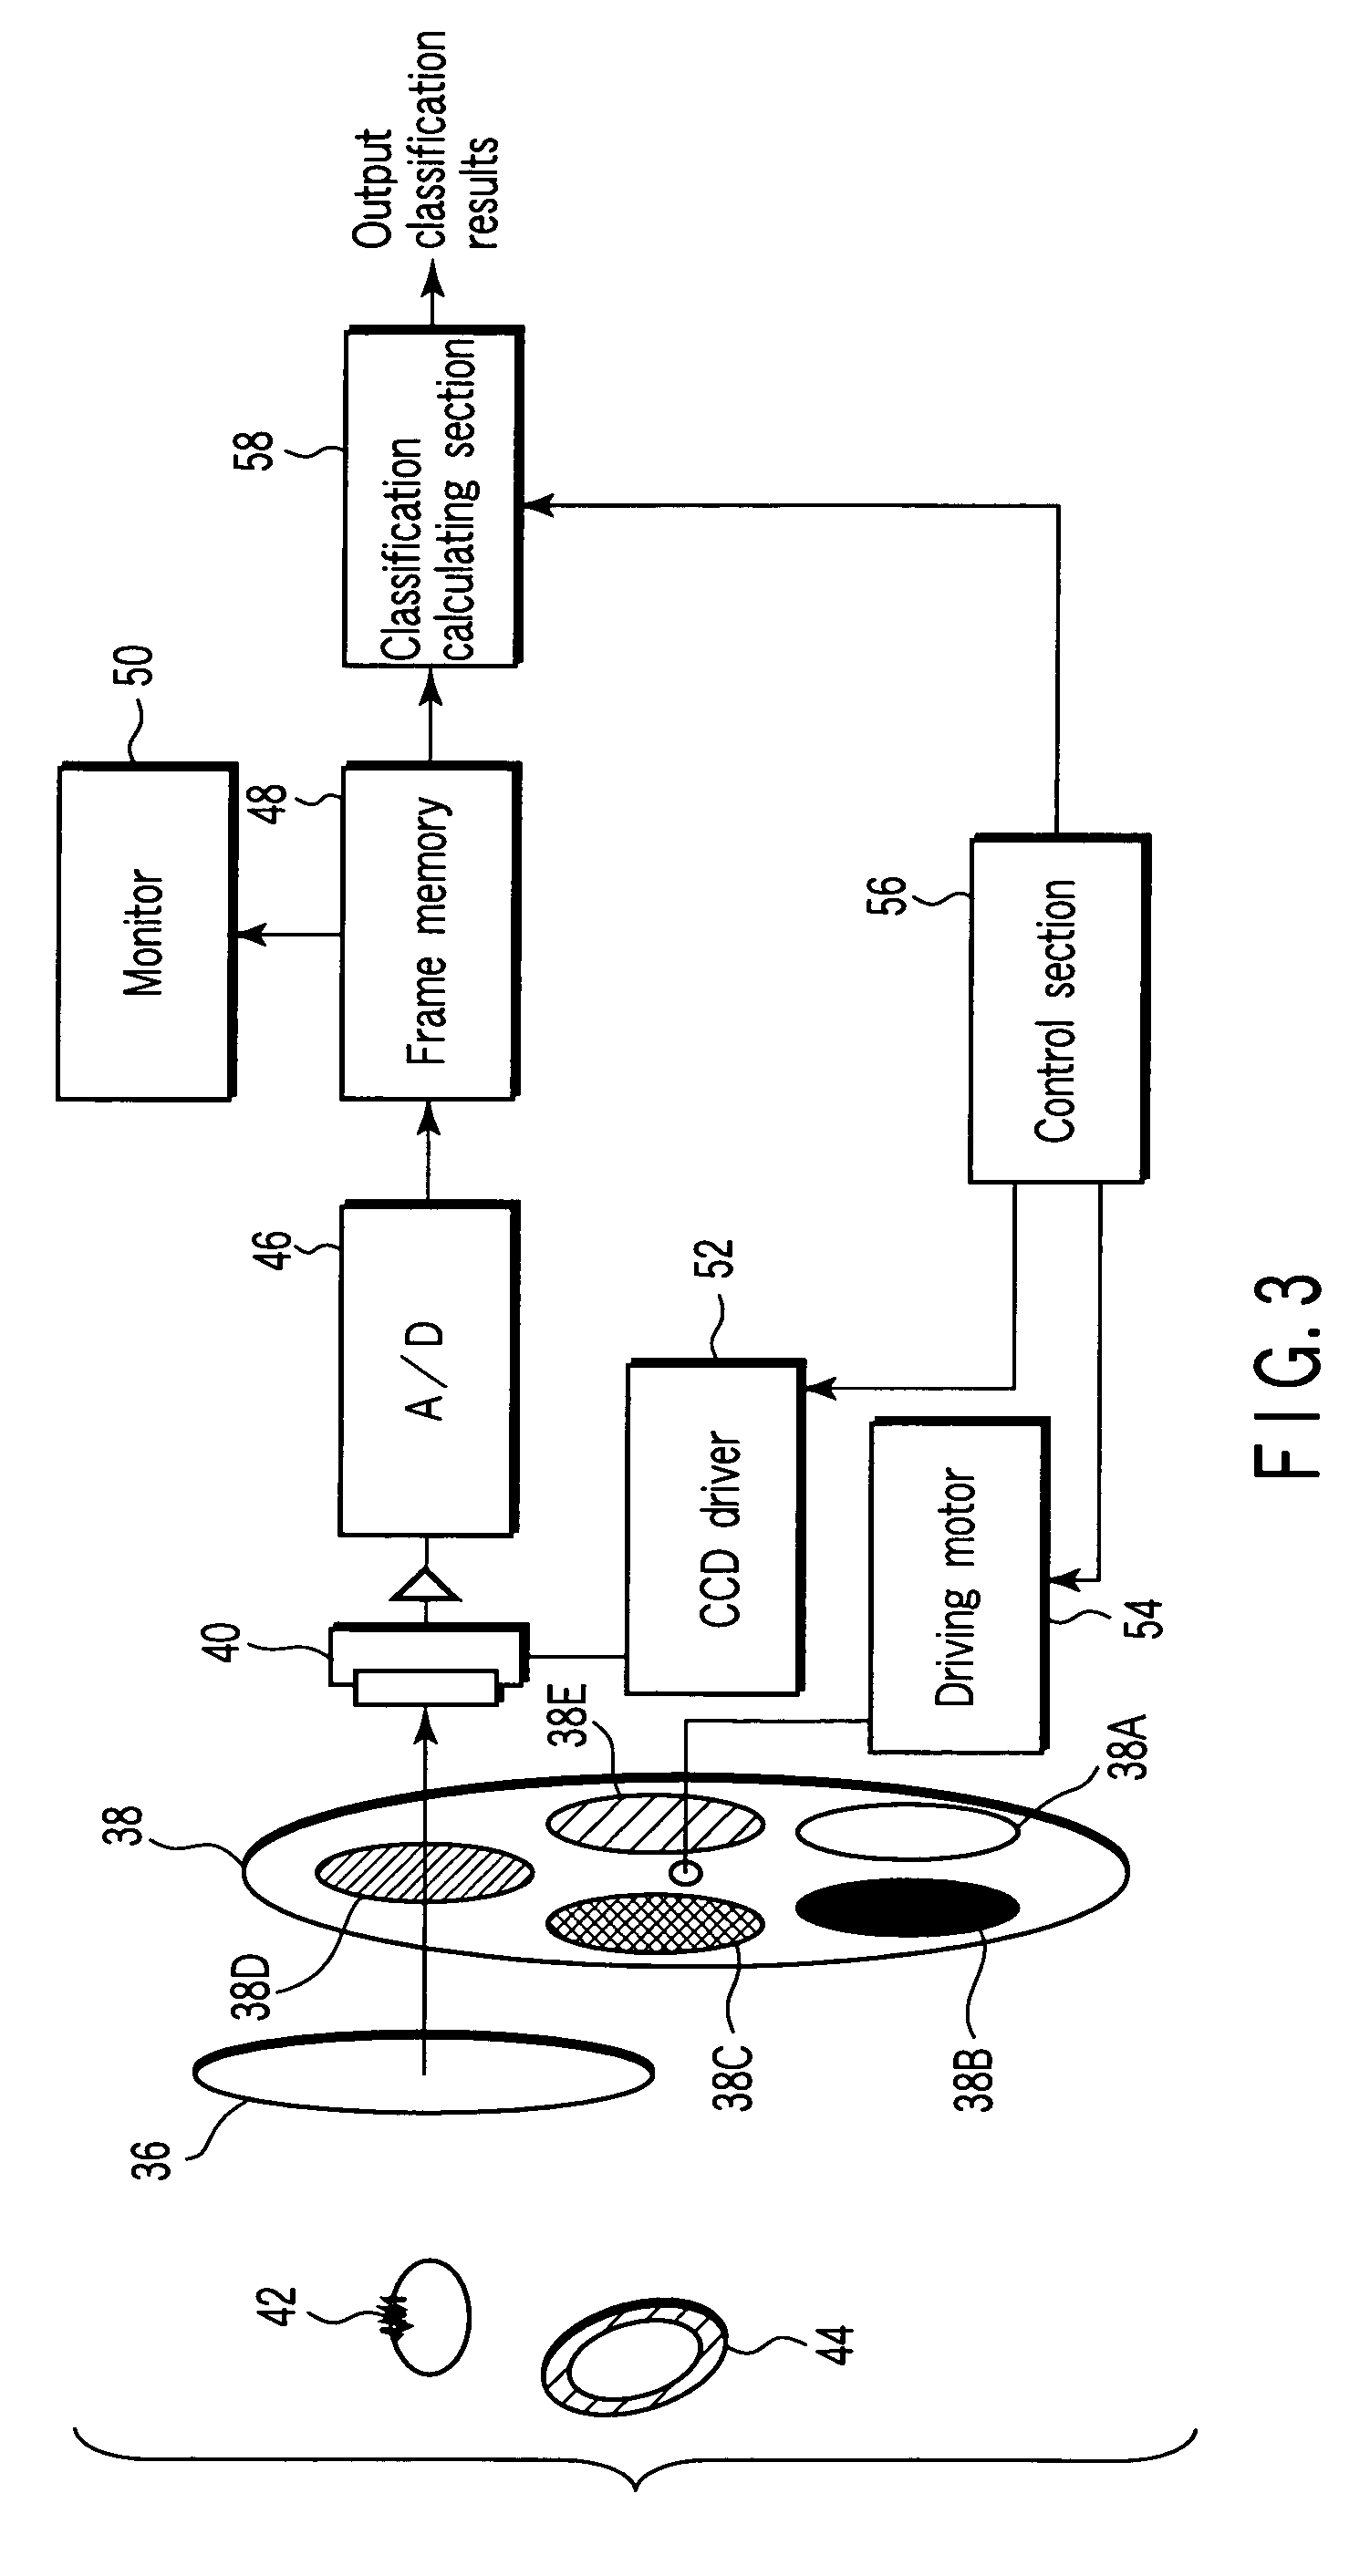 Image processing apparatus and method for processing images